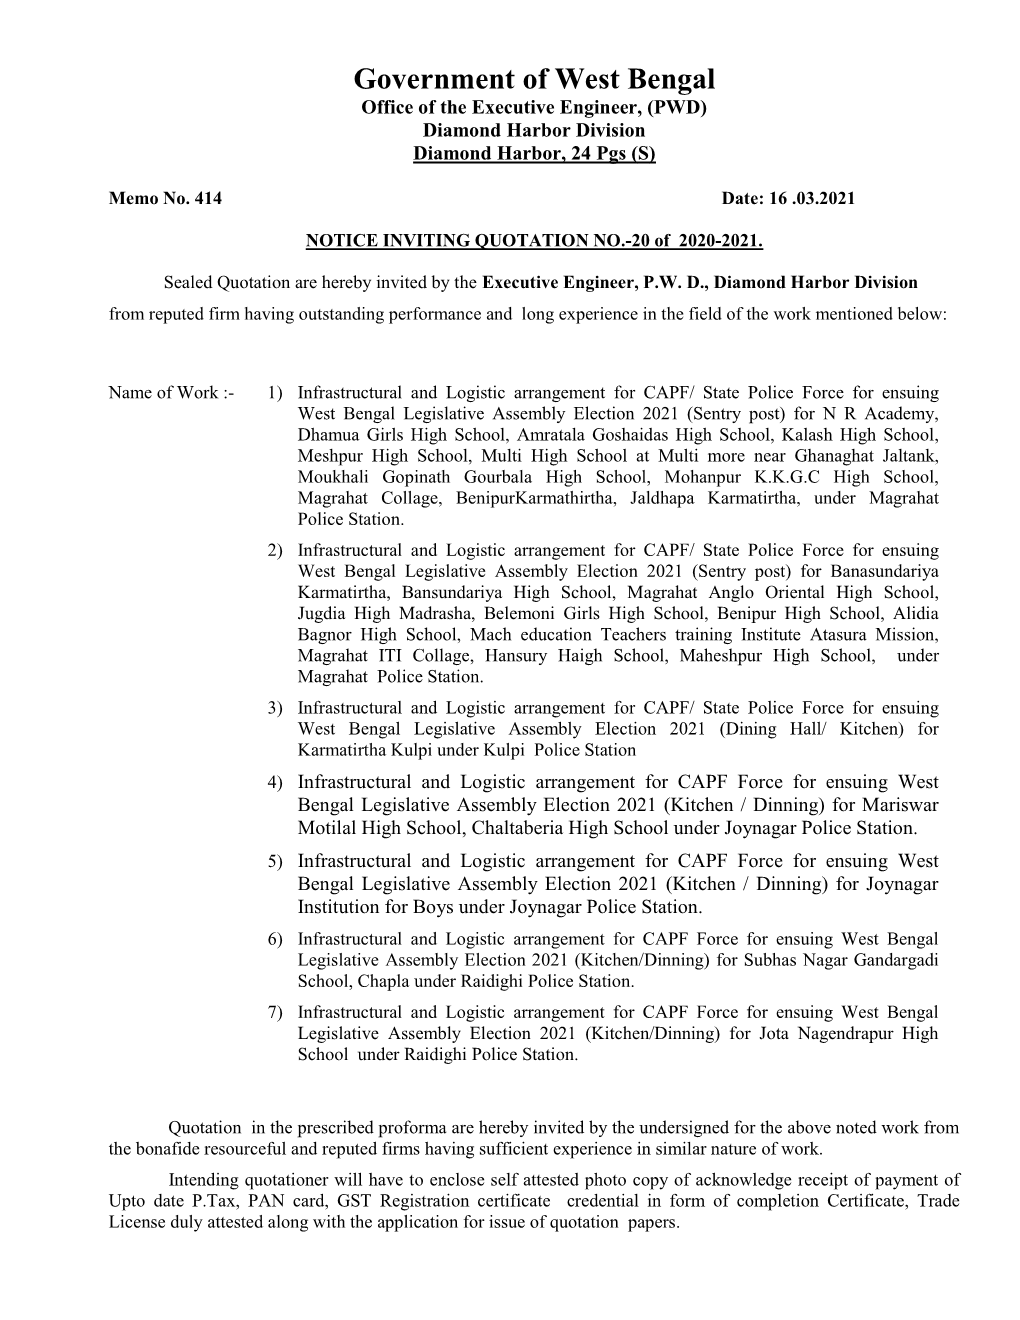 Government of West Bengal Office of the Executive Engineer, (PWD) Diamond Harbor Division Diamond Harbor, 24 Pgs (S)